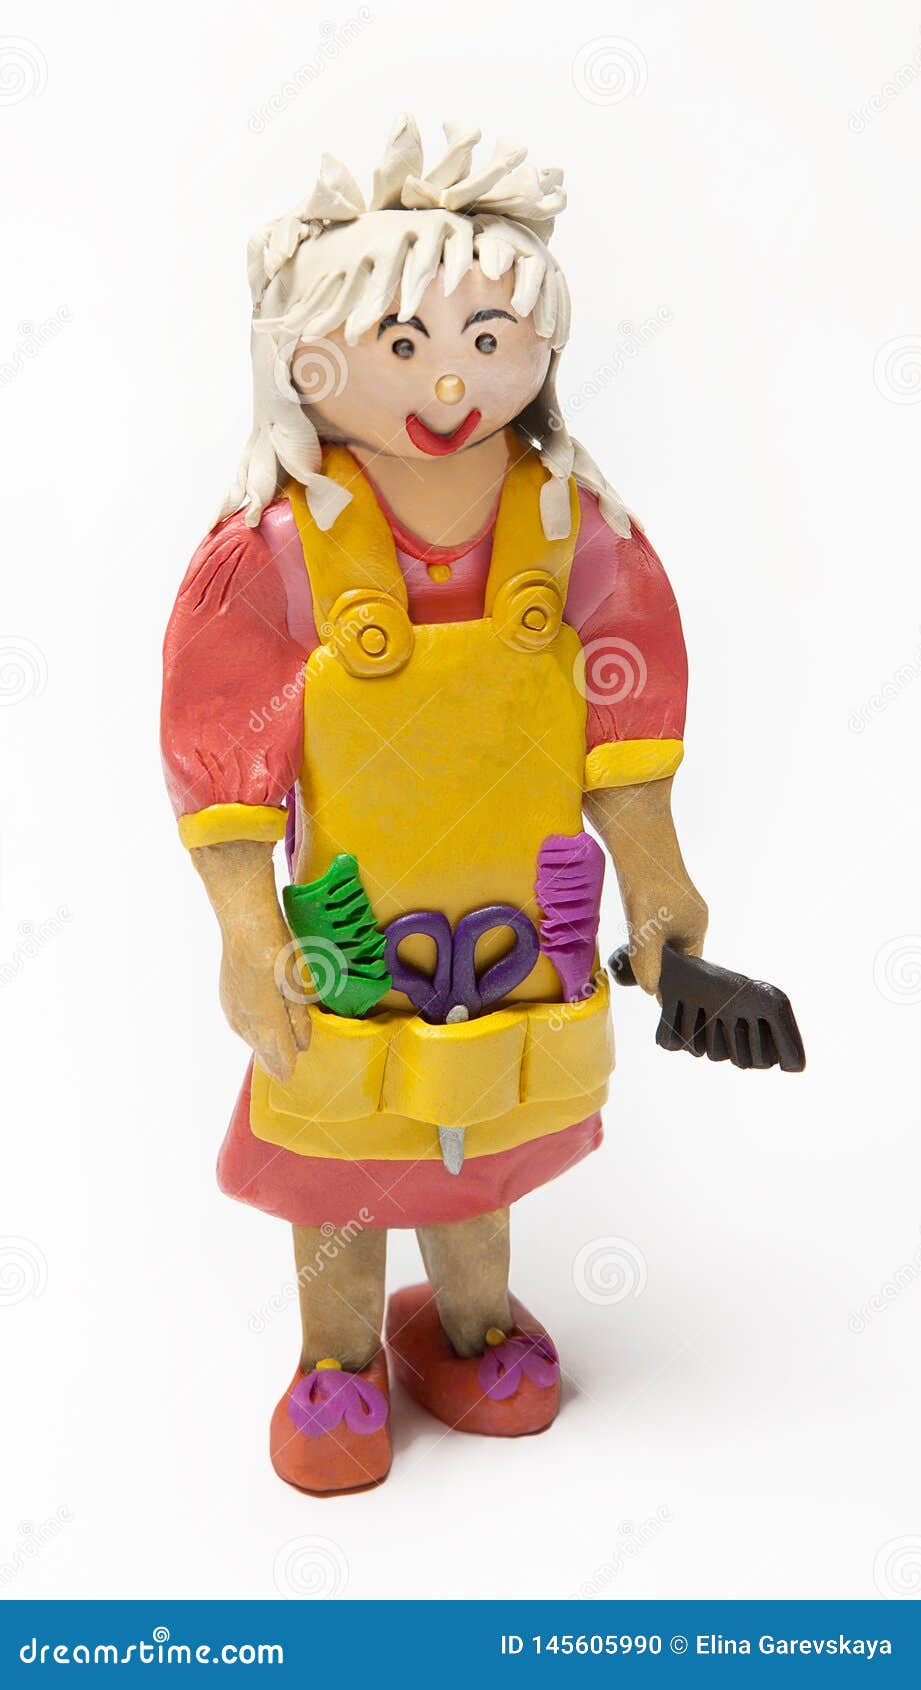 Doll Hairdresser Of Plasticine On A White Background Stock Photo